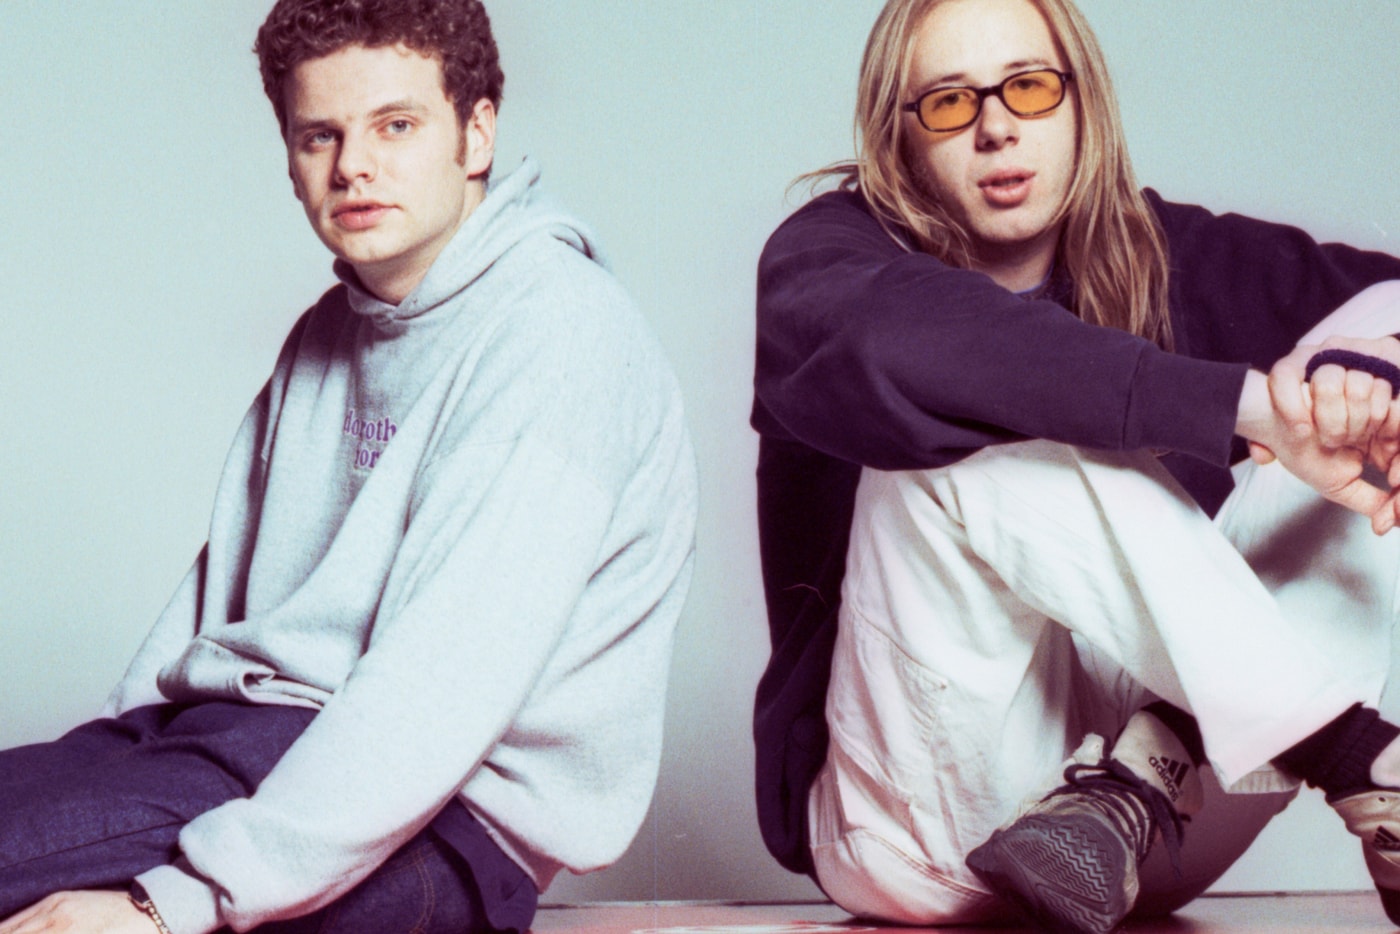 The Chemical Brothers, Members, Career, Music, & Facts